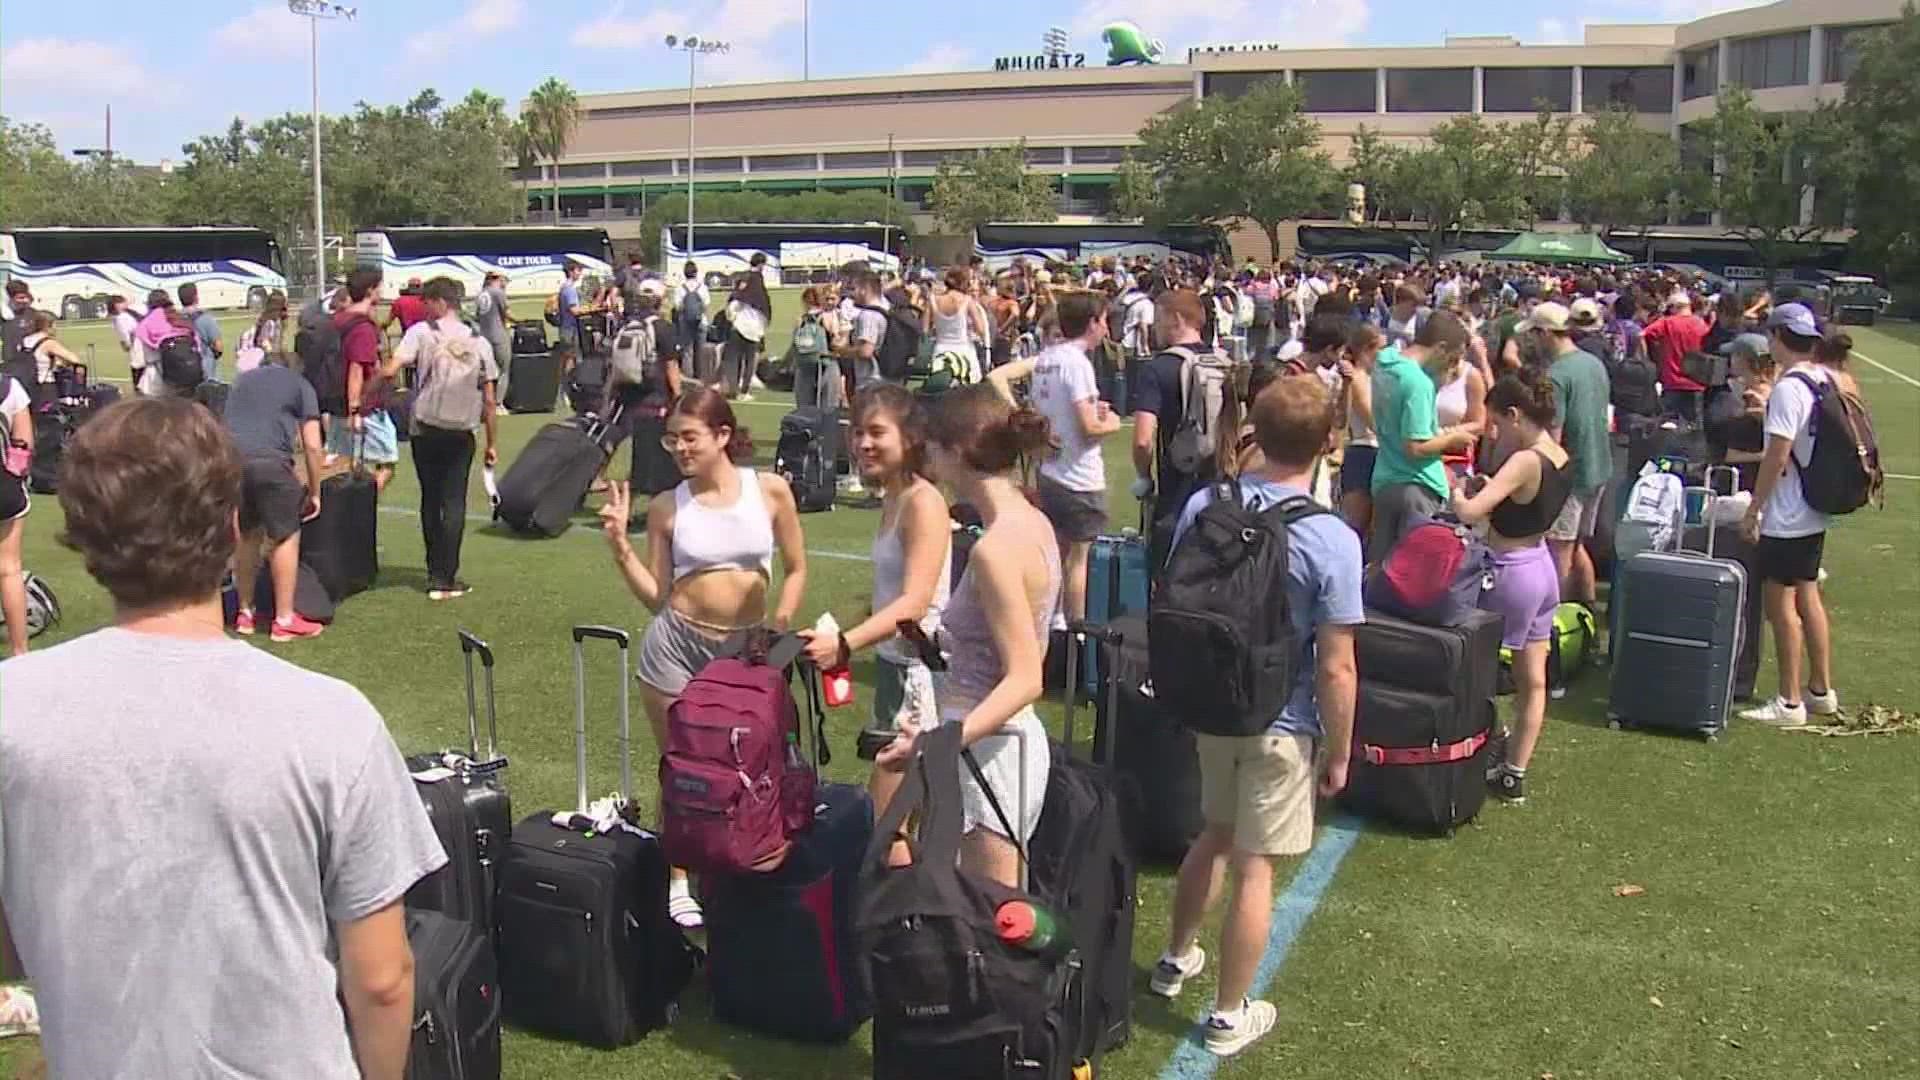 Tulane University students evacuated campus and headed to Houston. Students who can't go home will be given a place to stay and meals while they're away.